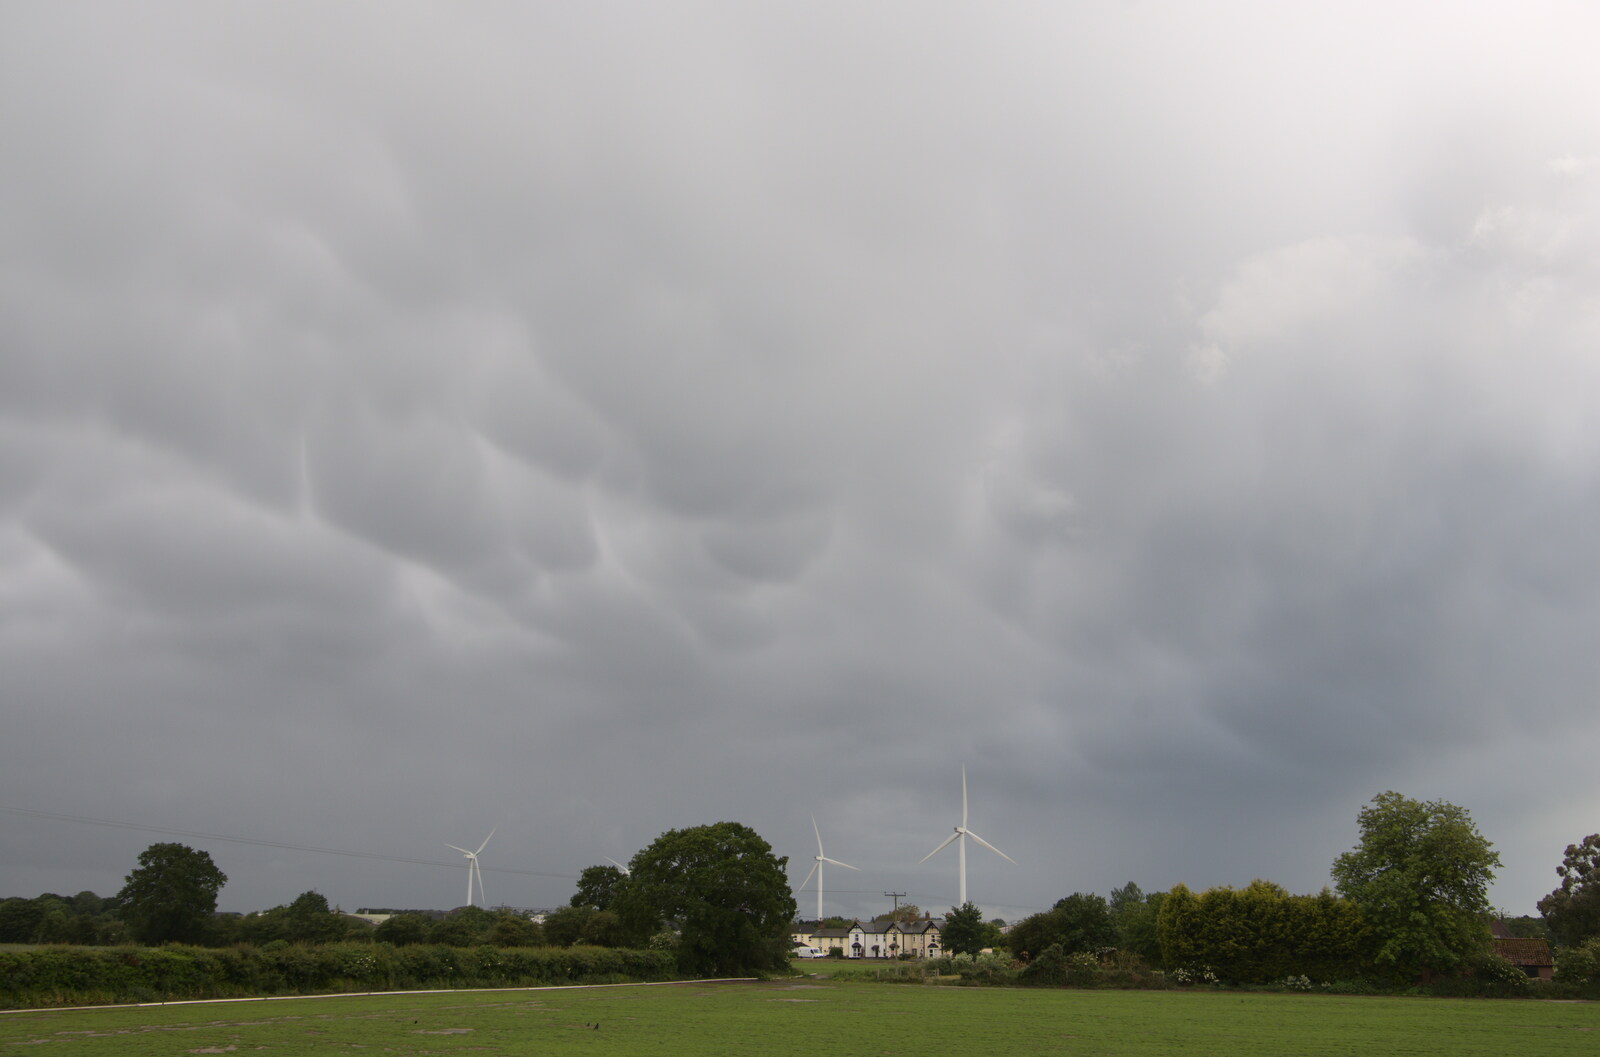 Strange-looking clouds outside the office window from A Return to Southwold, Suffolk - 14th June 2020